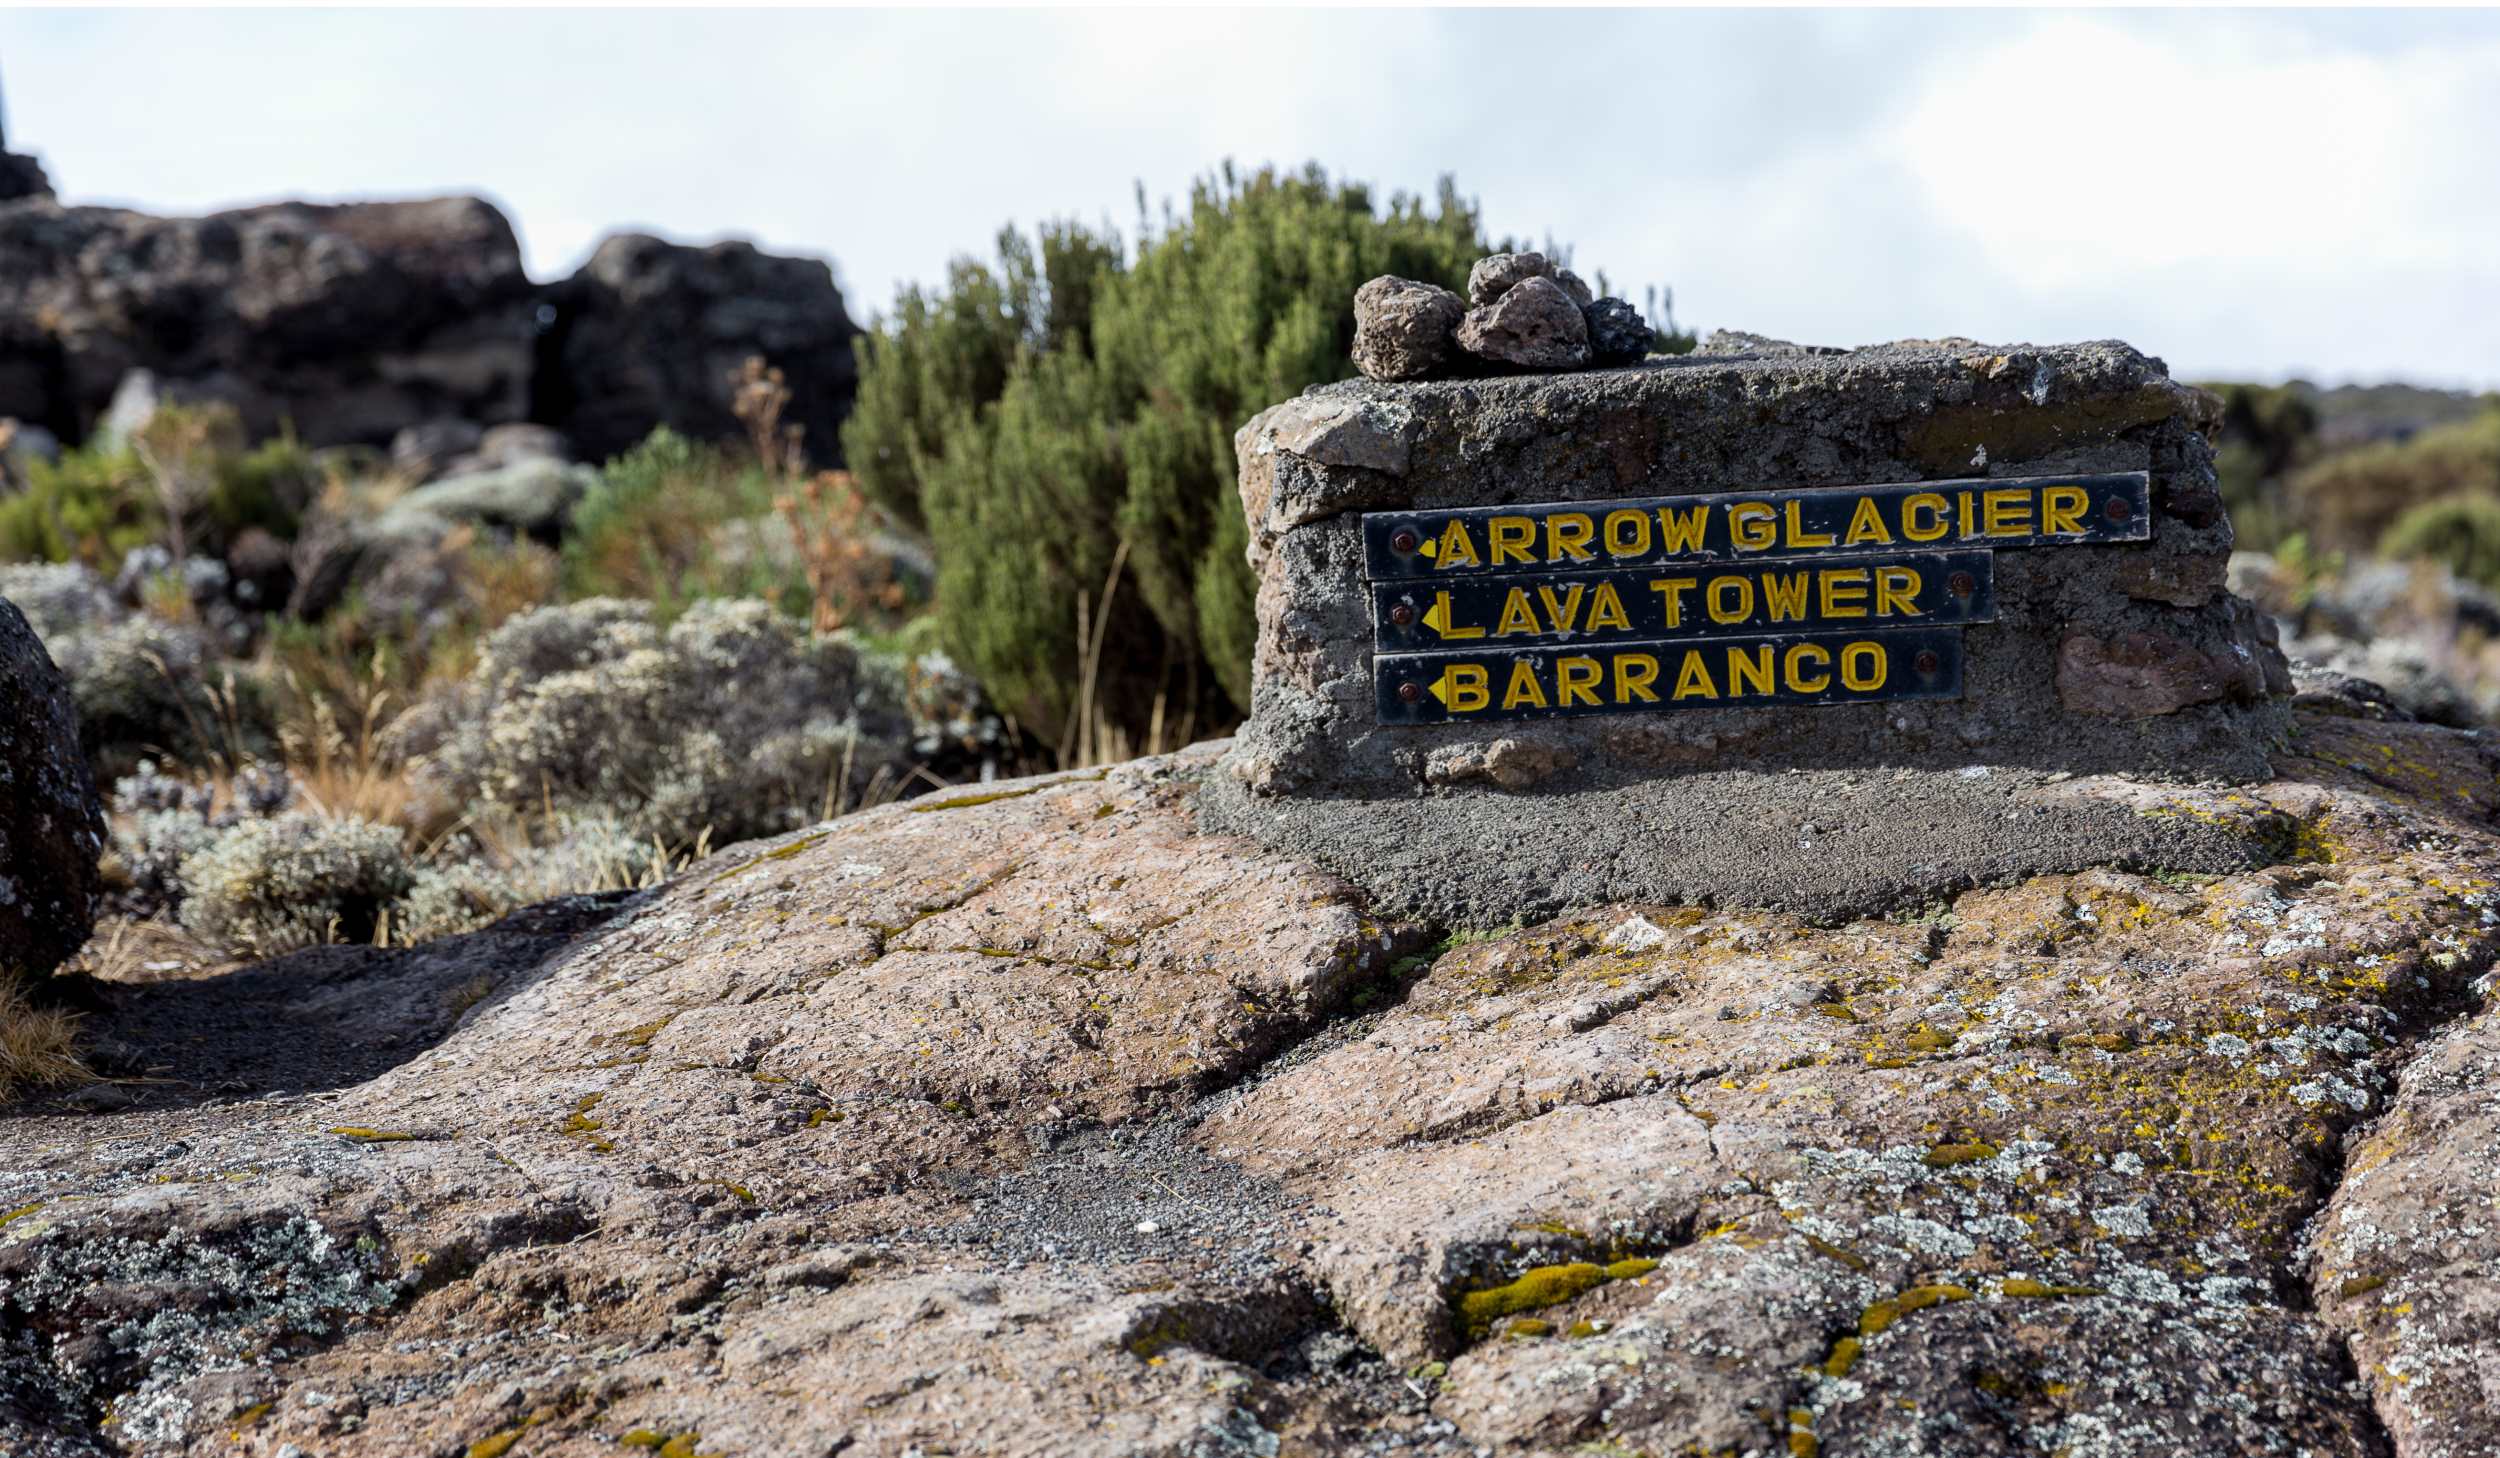 Lemosho Route 8 days, day 4: Shira 2 Camp (3, 900 m/ 12,795 ft) - Lava Tower (4,630 m/ 15,190 ft) - Barranco Camp (3,960 m/ 12,992 ft)